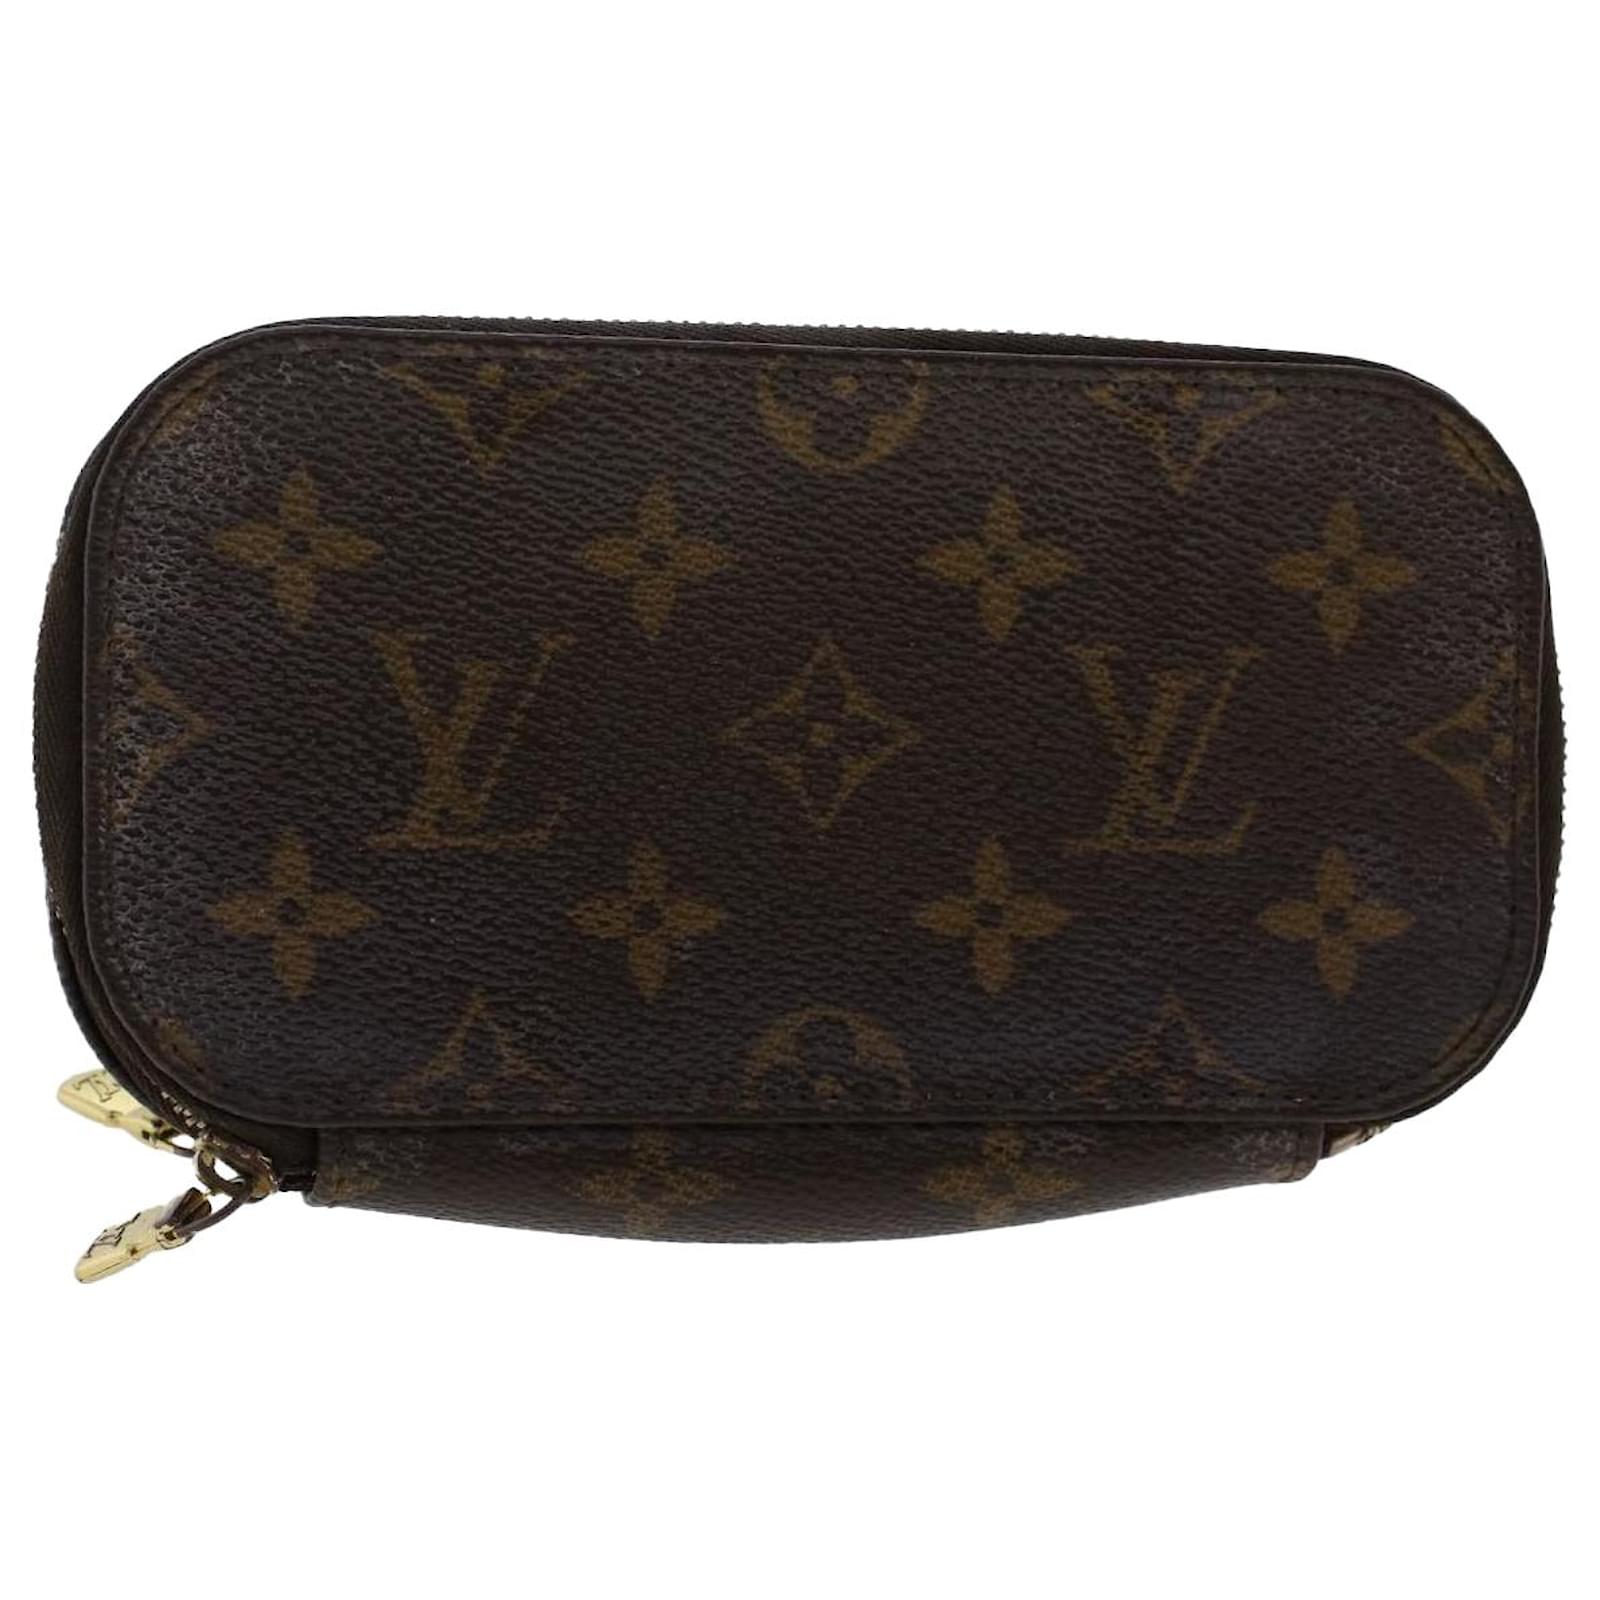 Shop Louis Vuitton MONOGRAM Cosmetic pouch (M47515) by Materialgirl